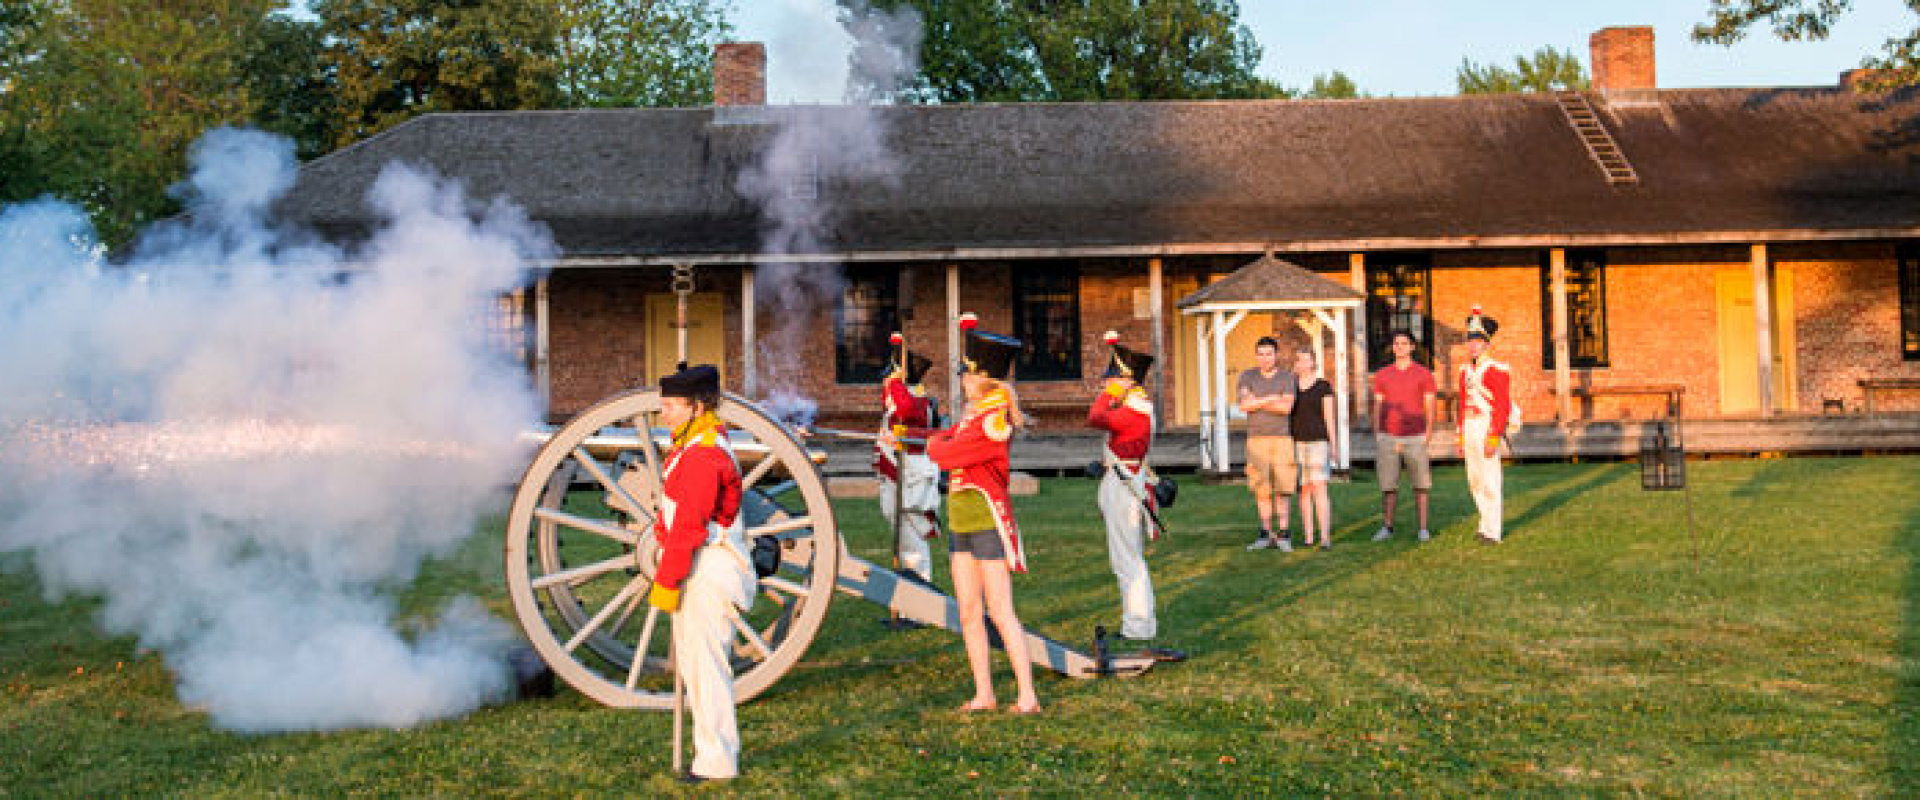 Re-enactors in 19th century military costumes demonstrate cannon firing at Fort Malden. 